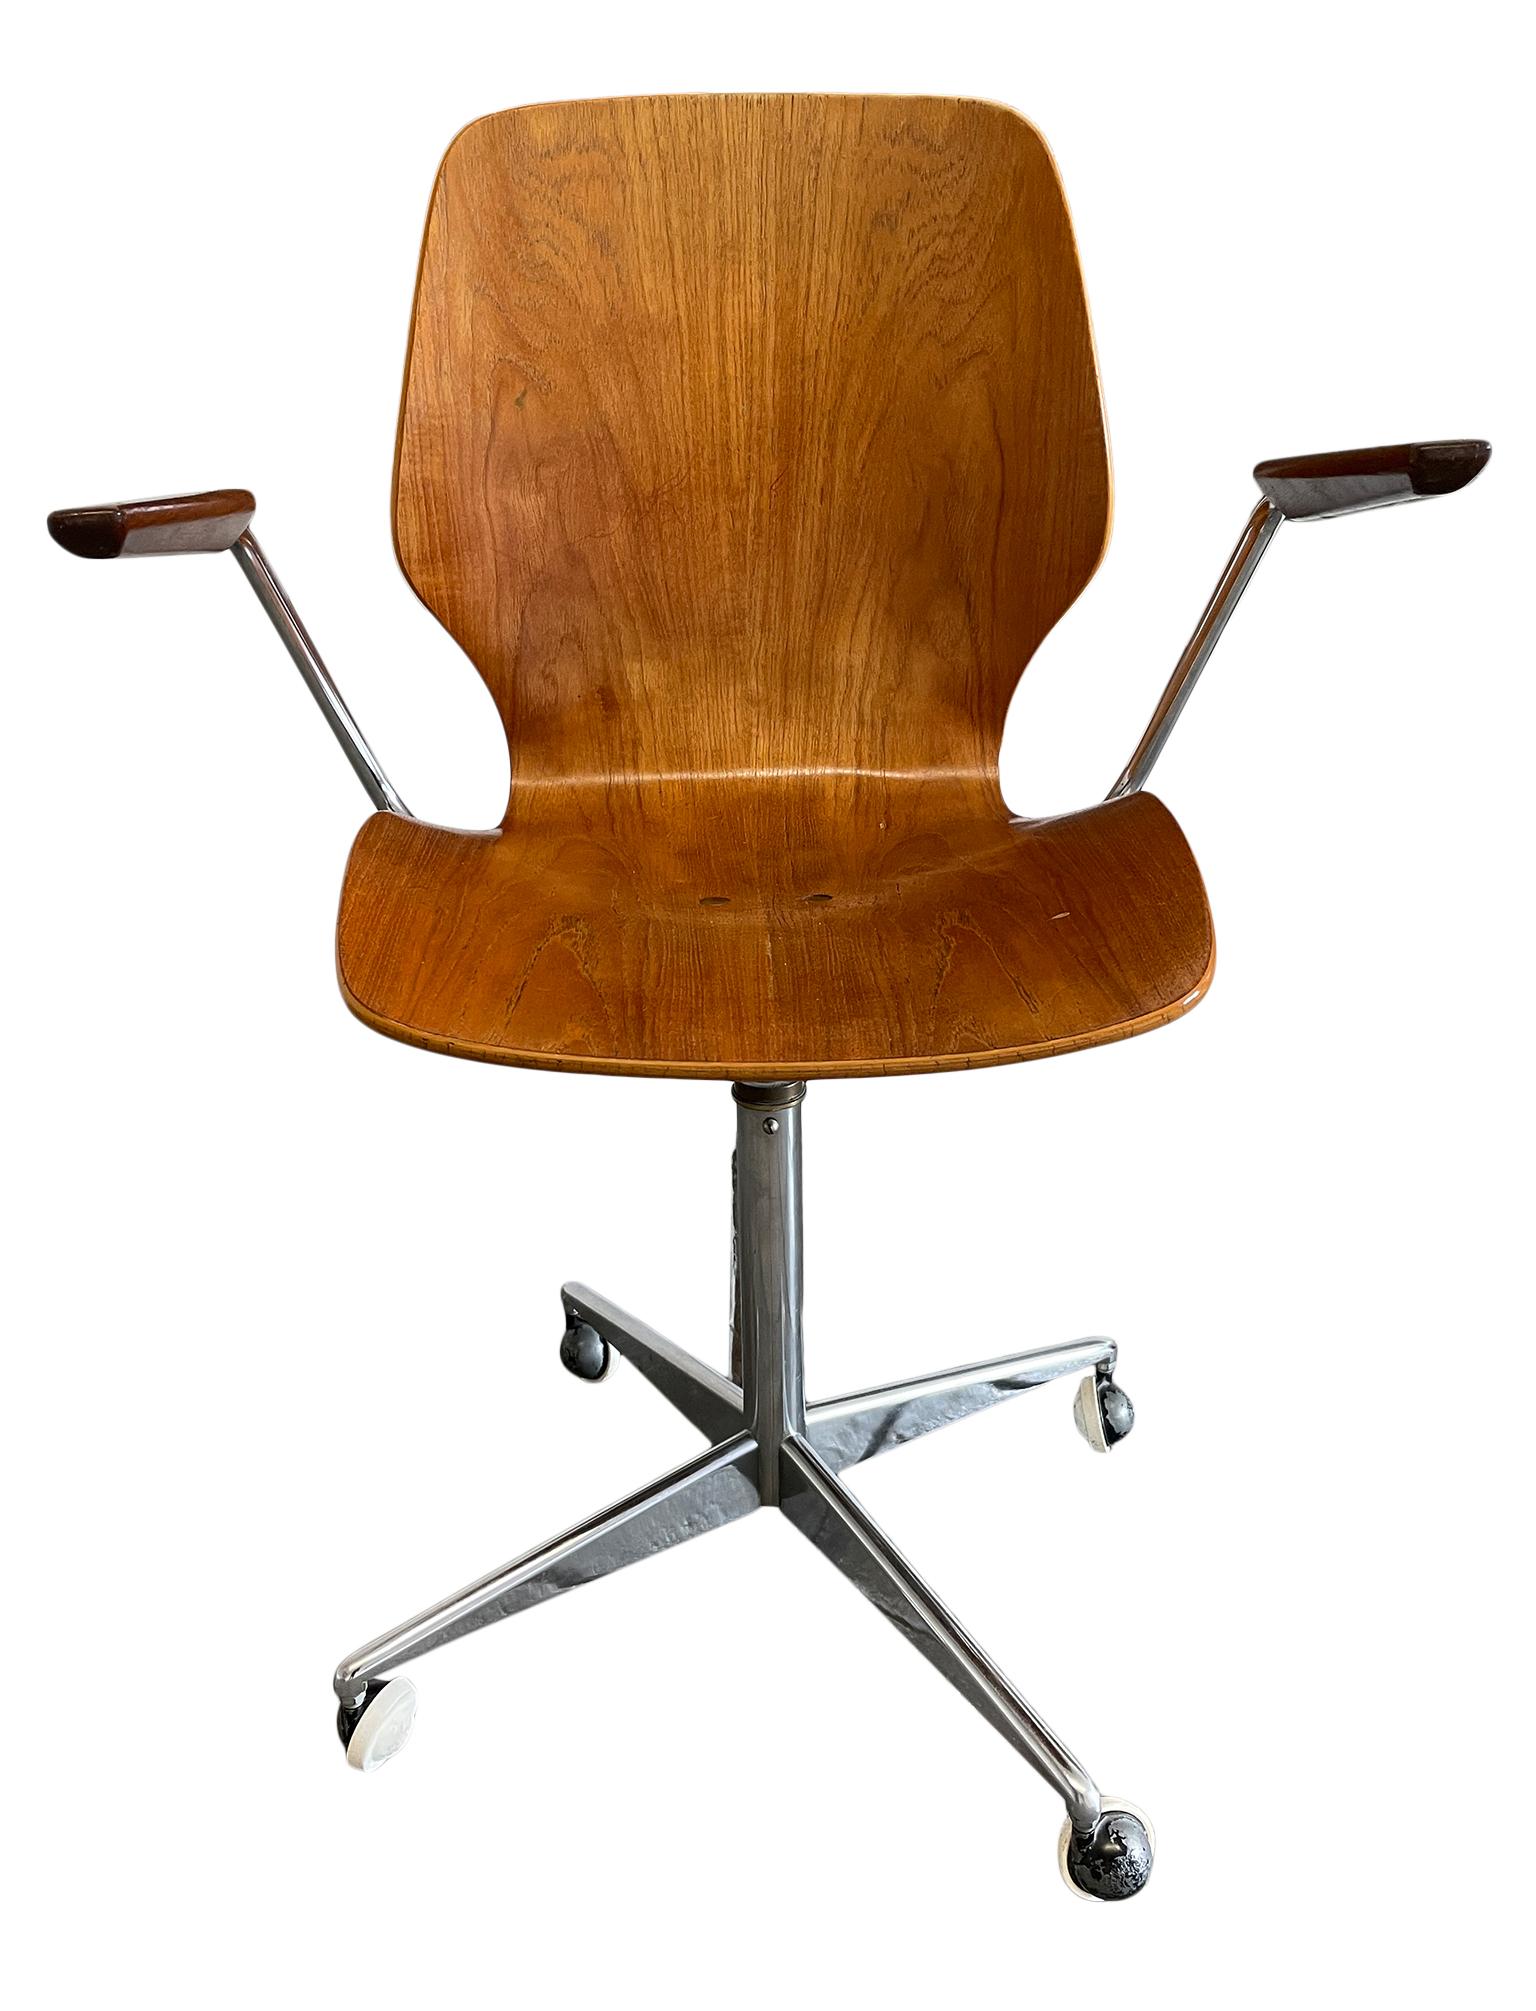 Mid-Century Modern Westnofa teak office chair minimalist. Bent wood seat adjustable chrome base with casters. Minimalist arm rests chrome and teak. Very clean chair. Labeled Under seat. Made in Norway. Very clean chair. Seat height is manually